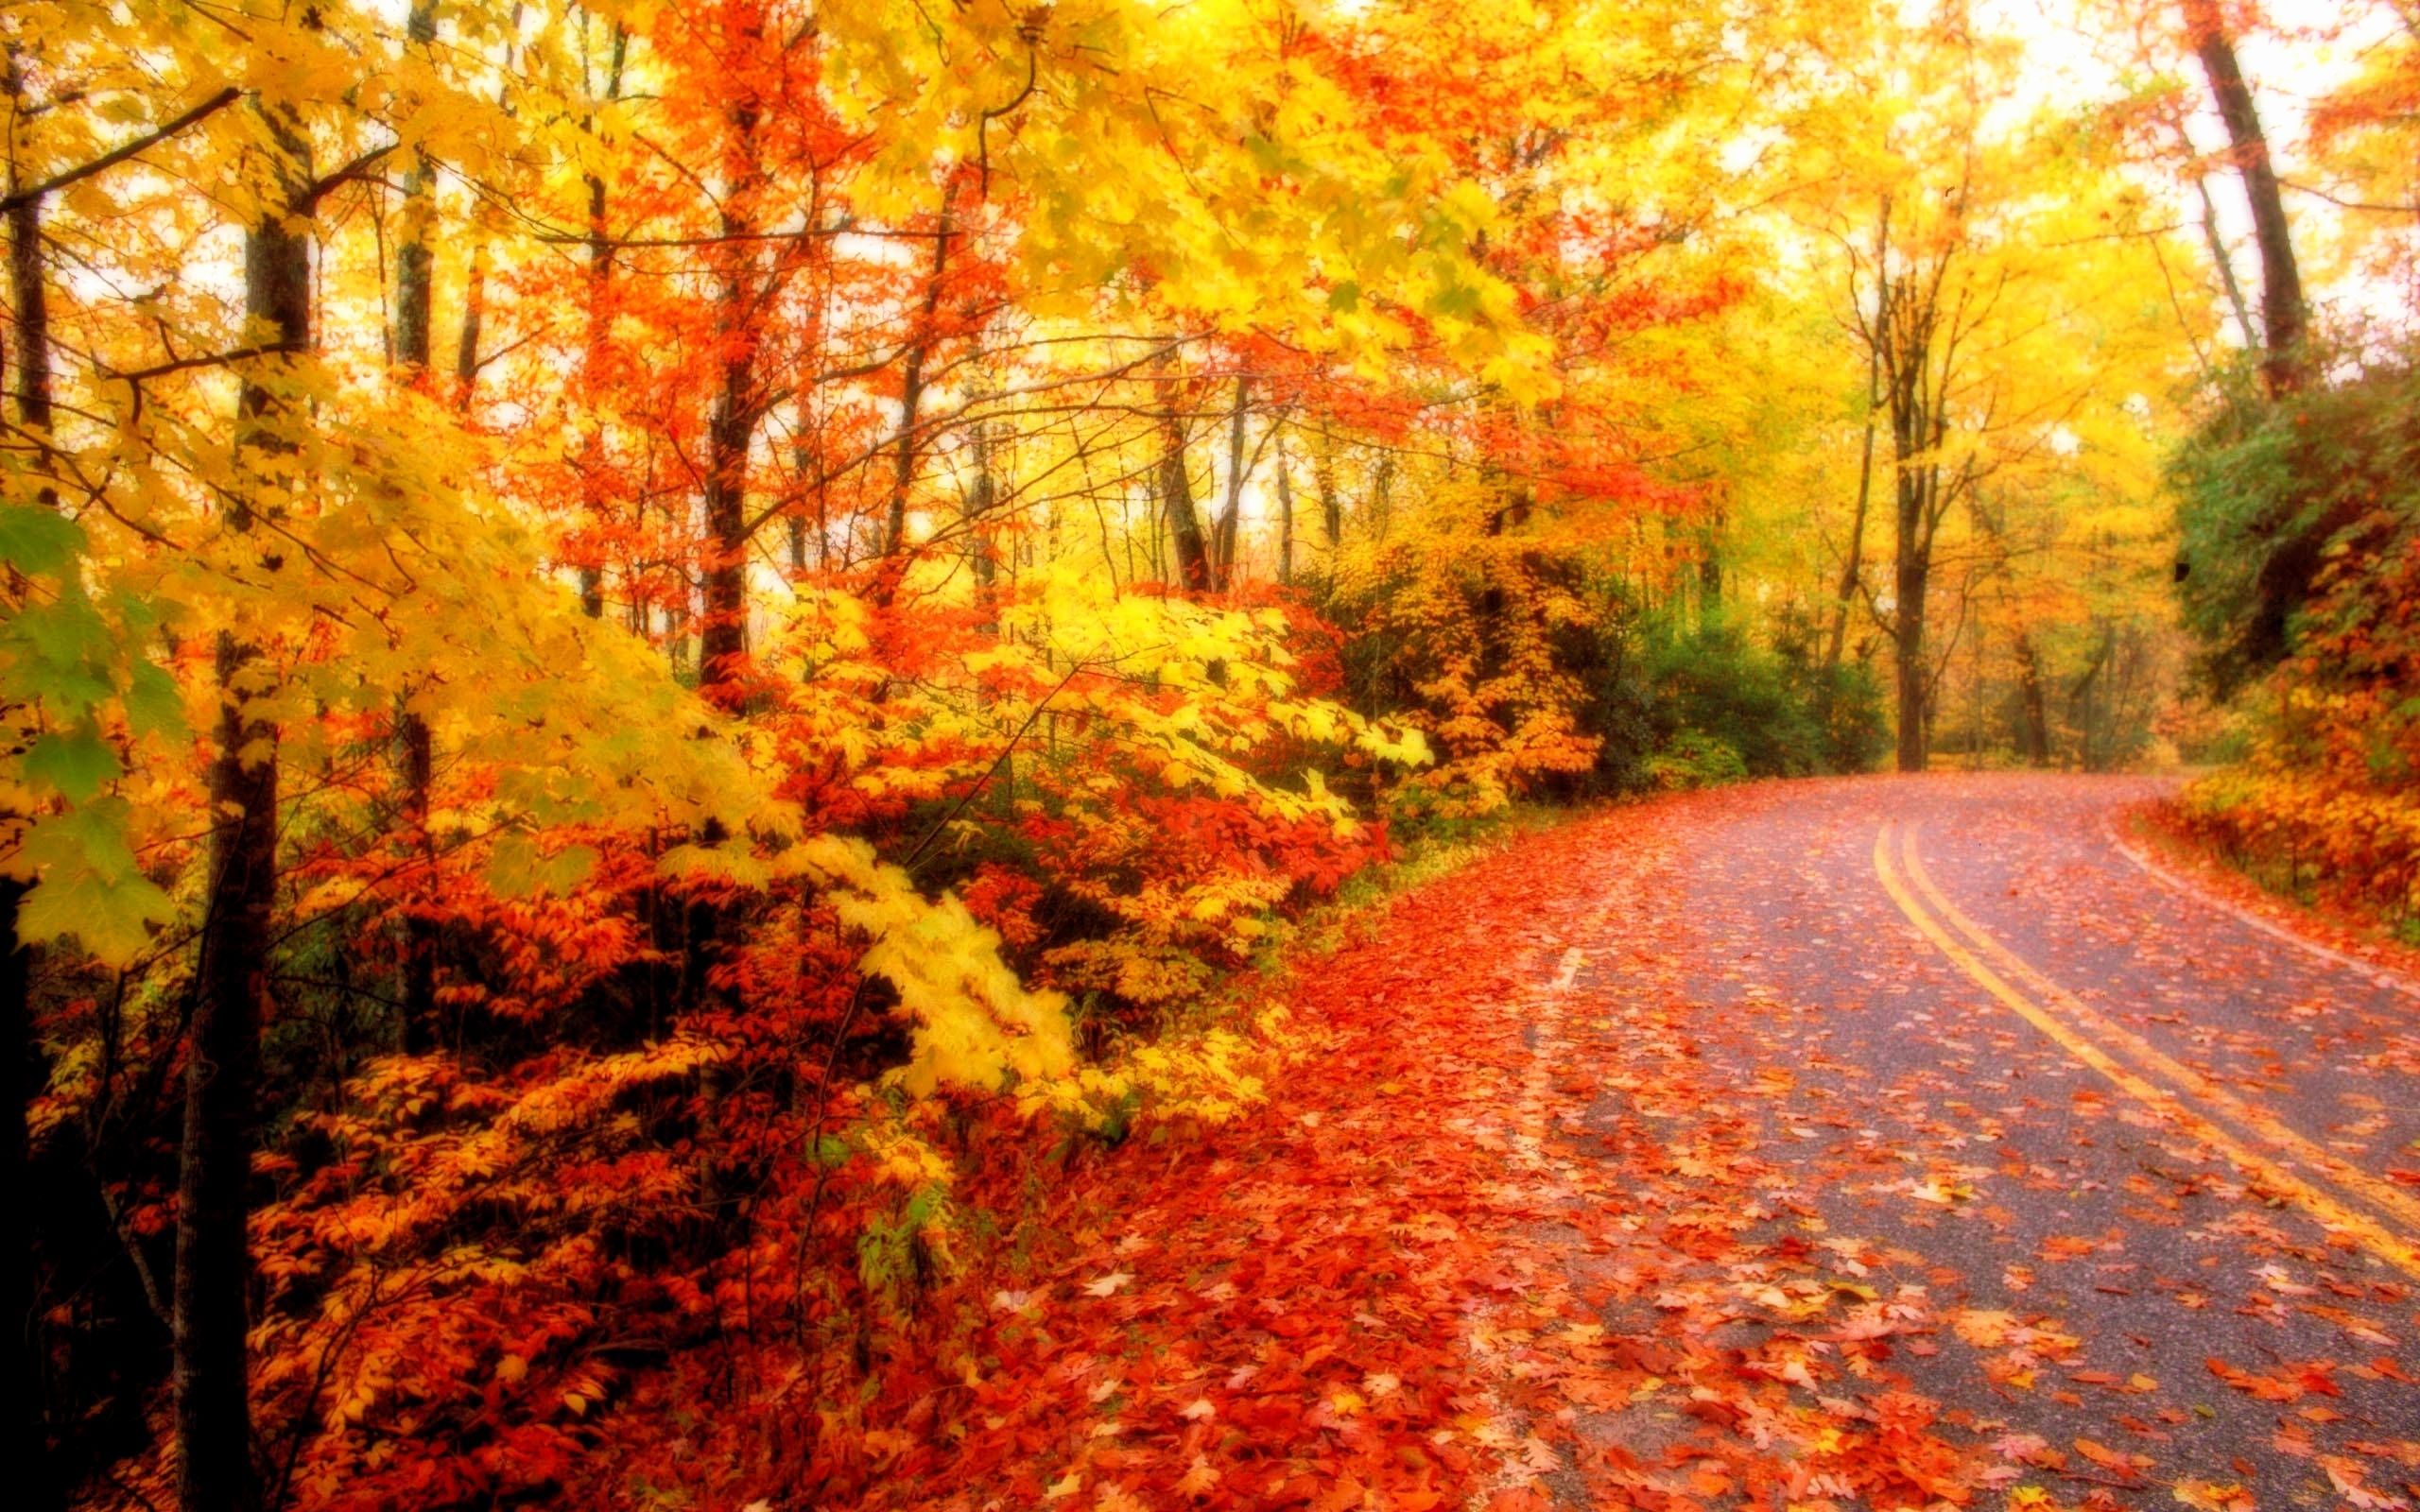 Autumn Leaf Wallpaper Luxury Fall Foliage Wallpaper for Desktop Of the Day of The Hudson